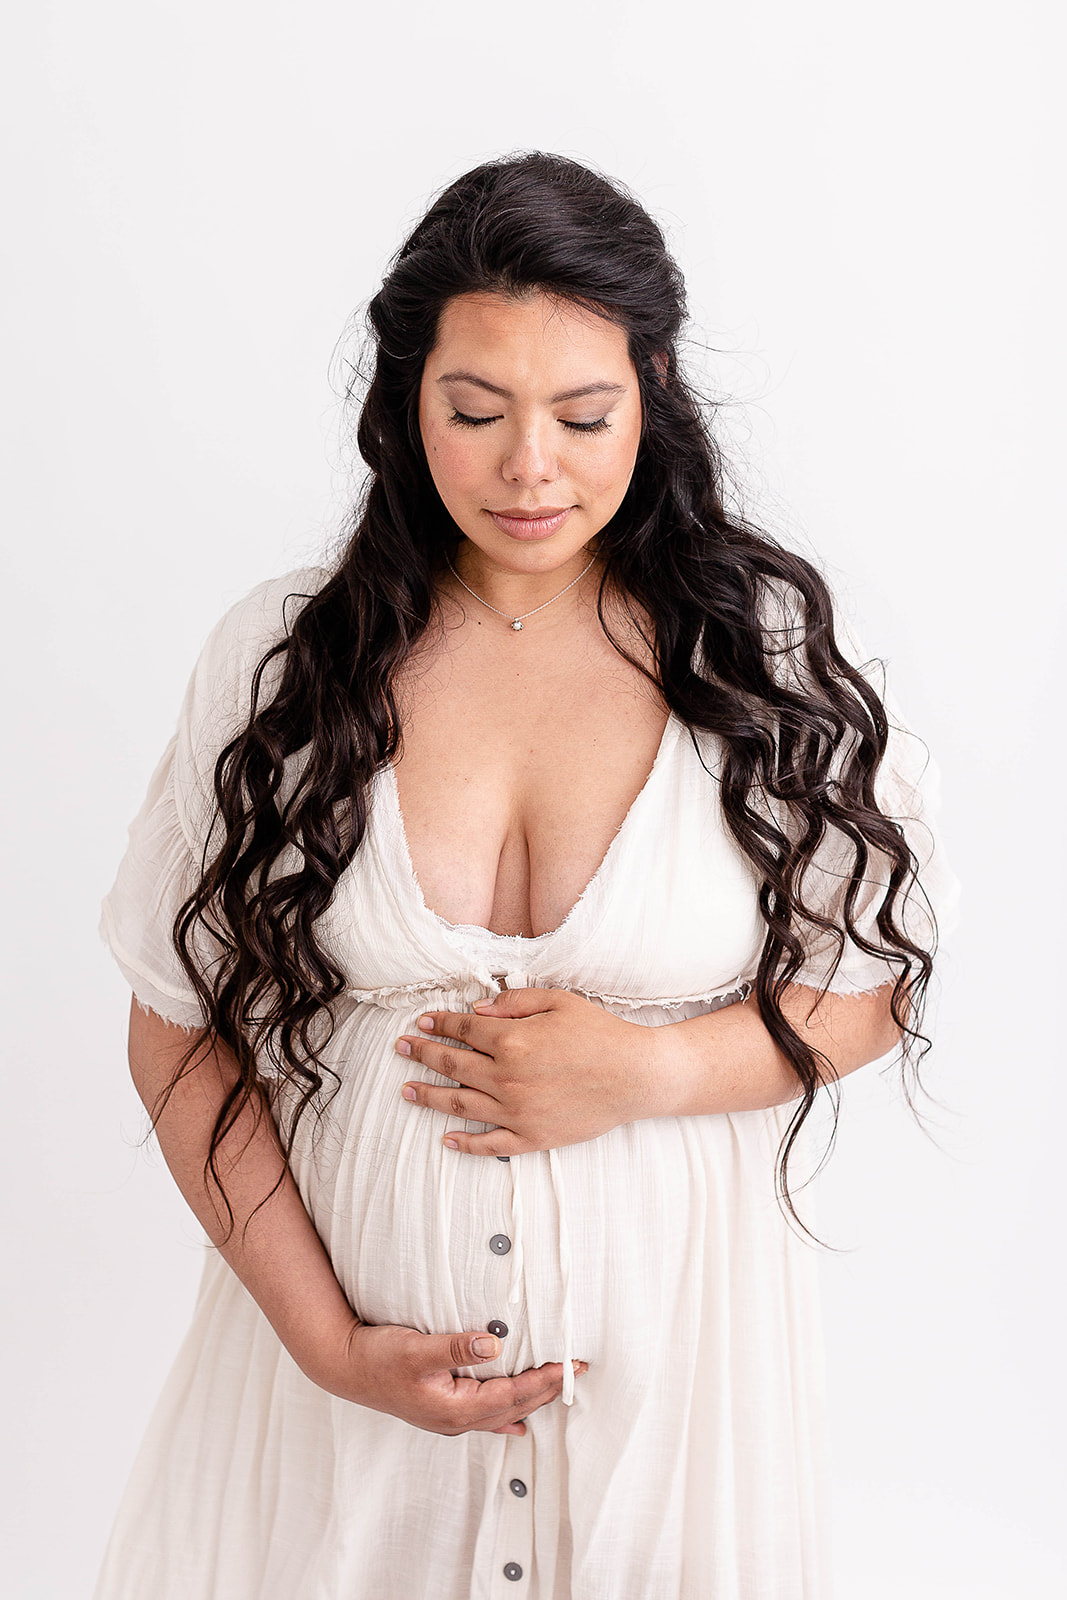 A mother to be with long black hair stands in a studio looking down at her bump